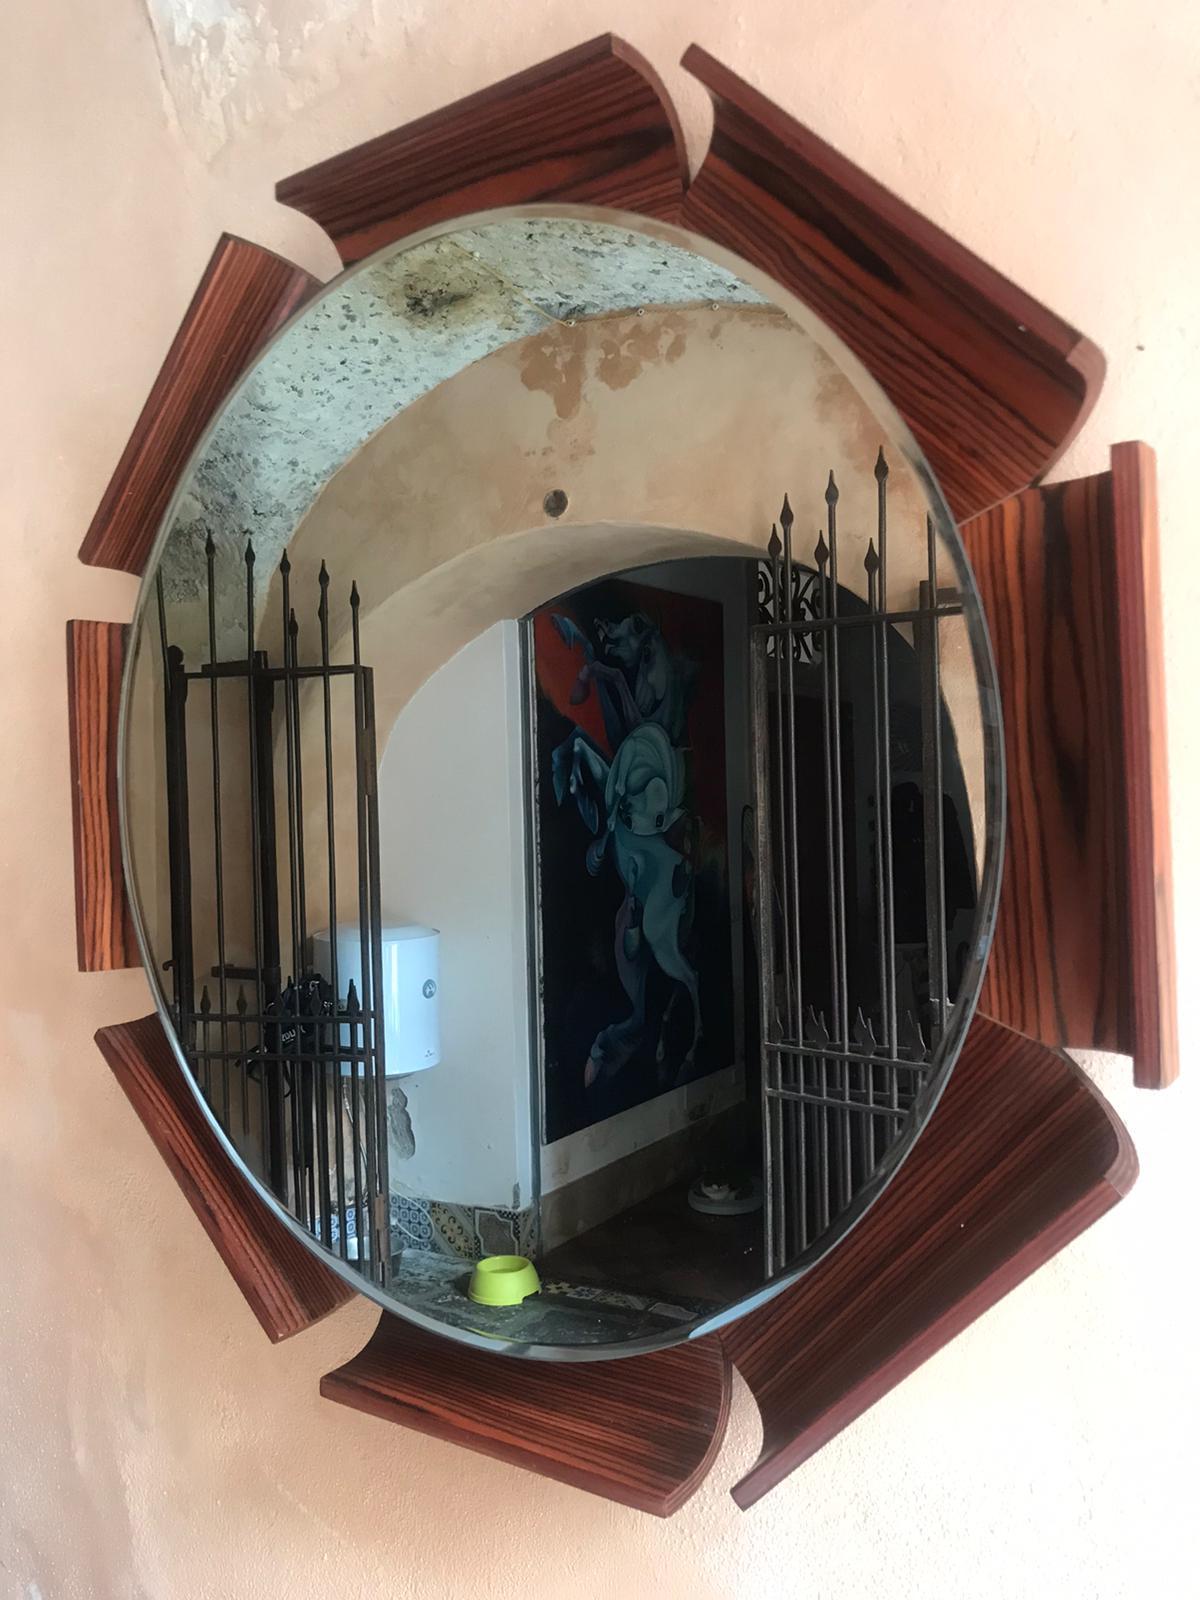 An incredibly unique midcentury italian octagonal -shaped solid bentwood wall-mounted mirror. Eight folded curves inward toward the mirror surface. circa 1950s. The mirror has bevelled edges. The glass mirror is cm 50 diameter

In excellent vintage